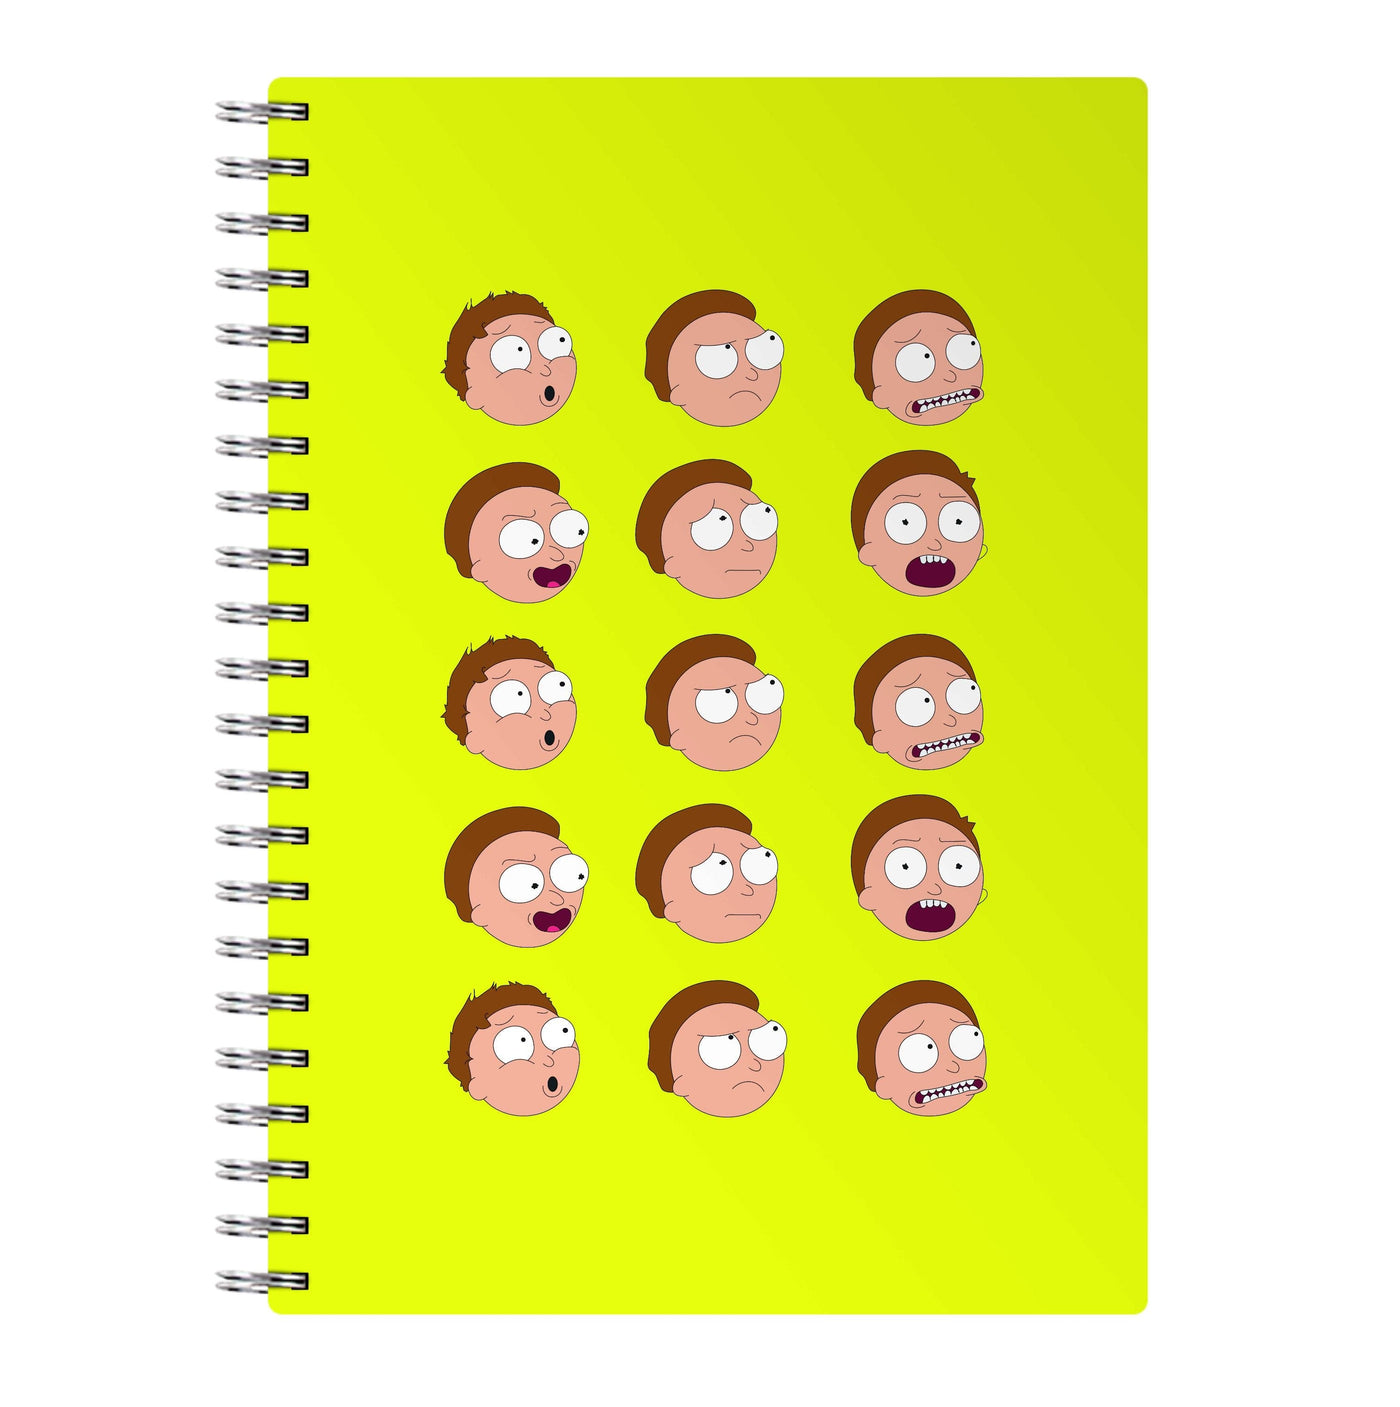 Morty Pattern - Rick And Morty Notebook